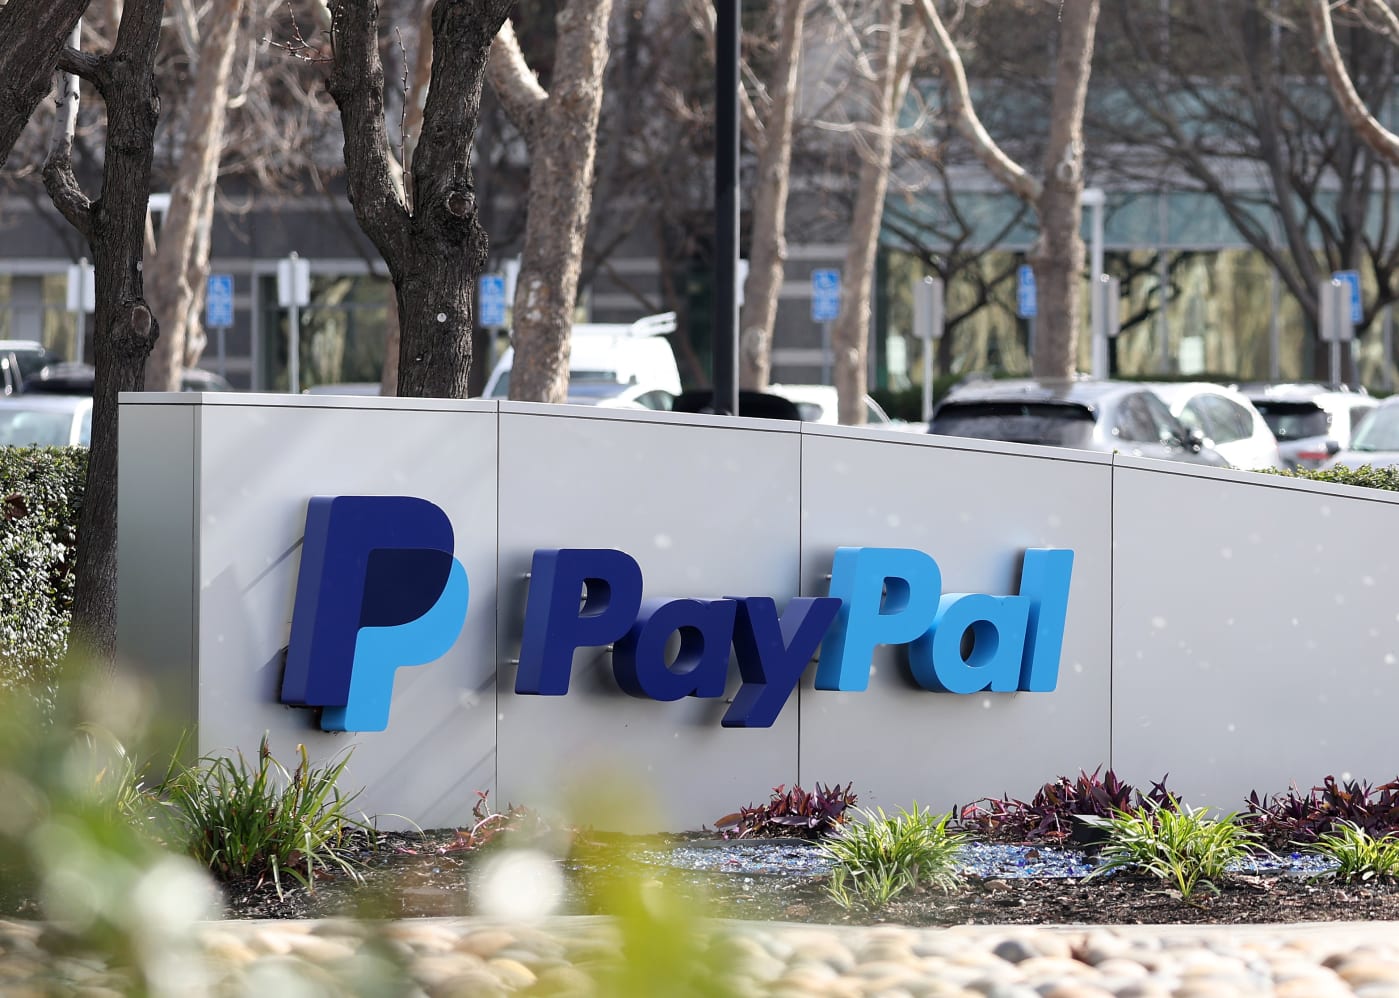 PayPal is laying off 2,500 employees